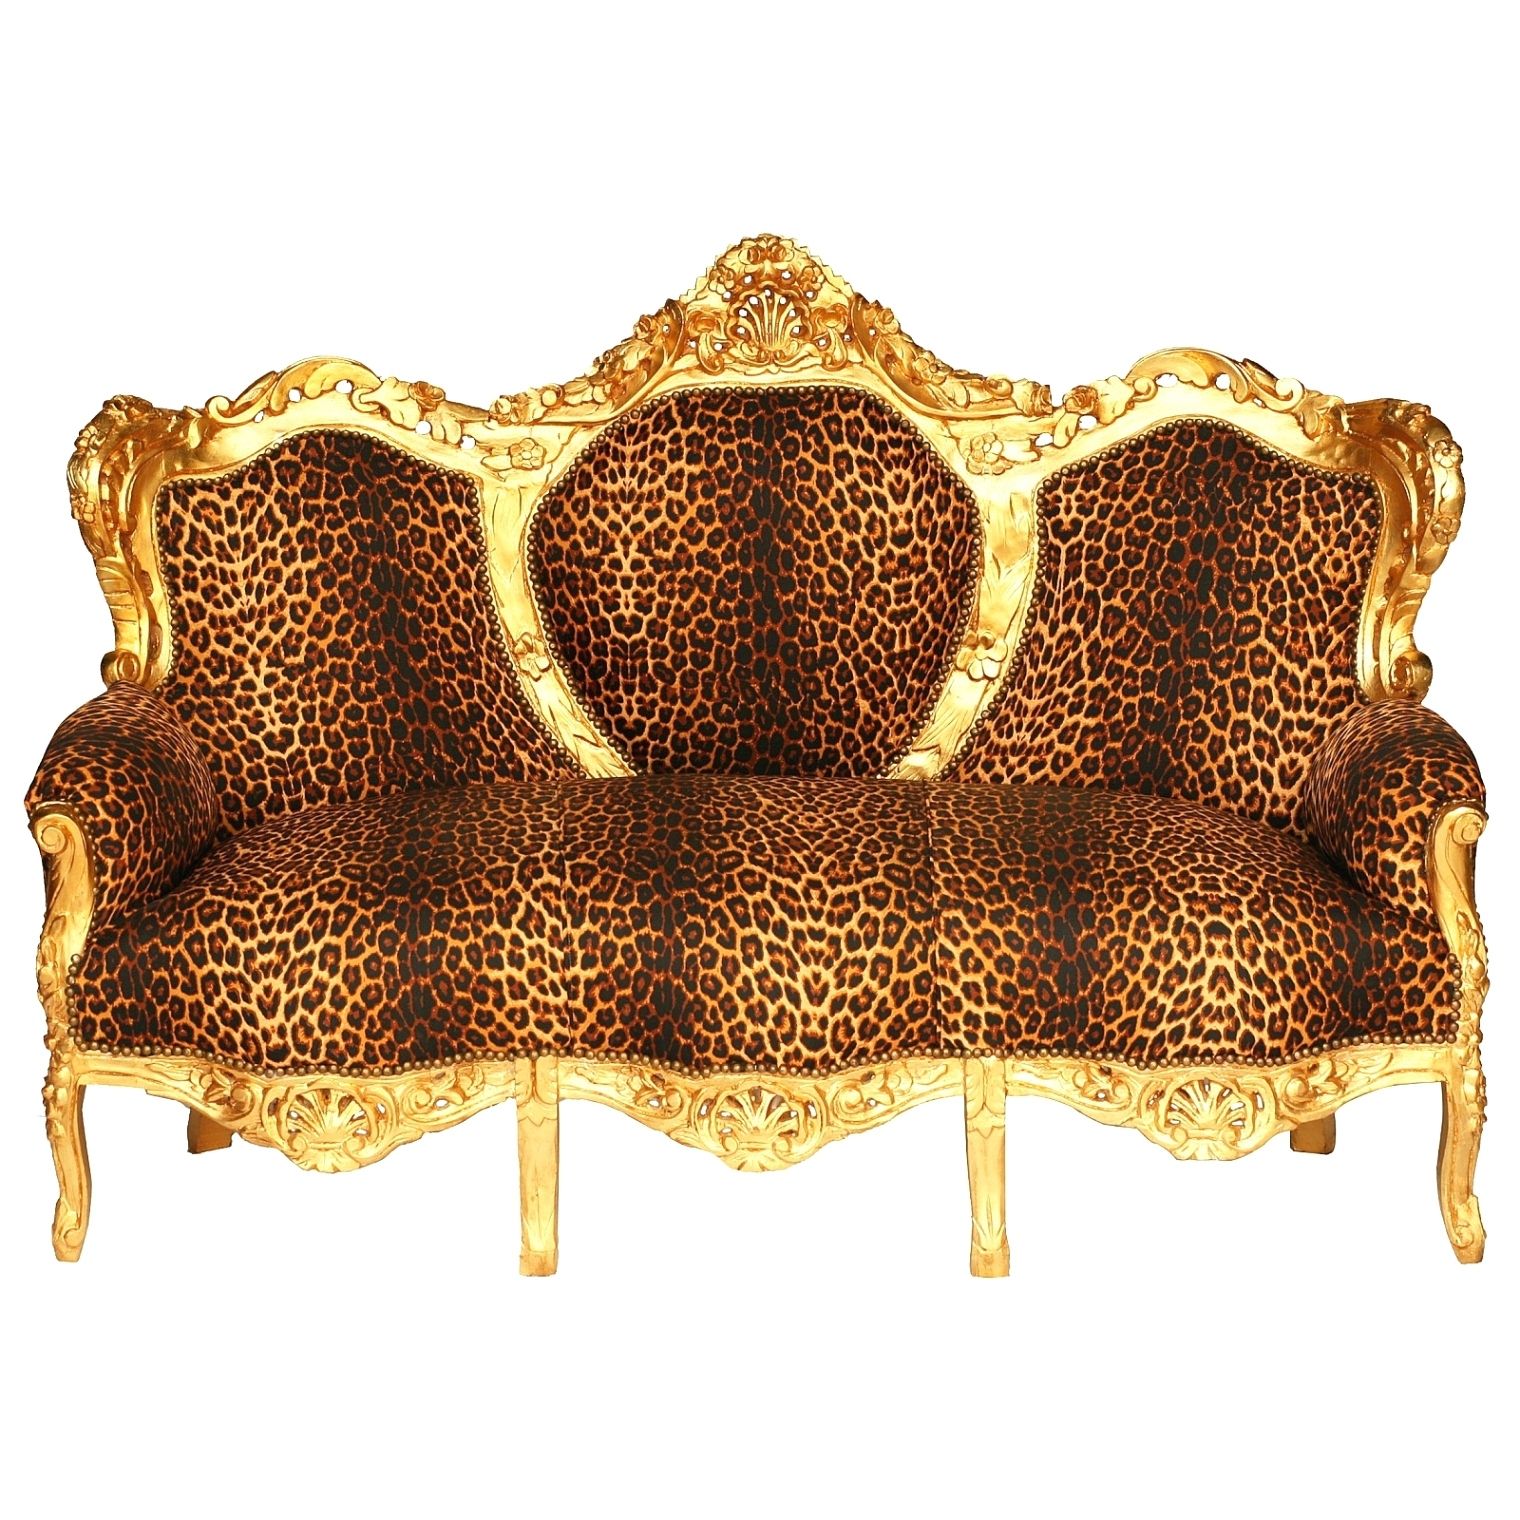 Leopard Print Chaise Lounges In Preferred New Animal Print Chairs (40 Photos) (View 13 of 15)